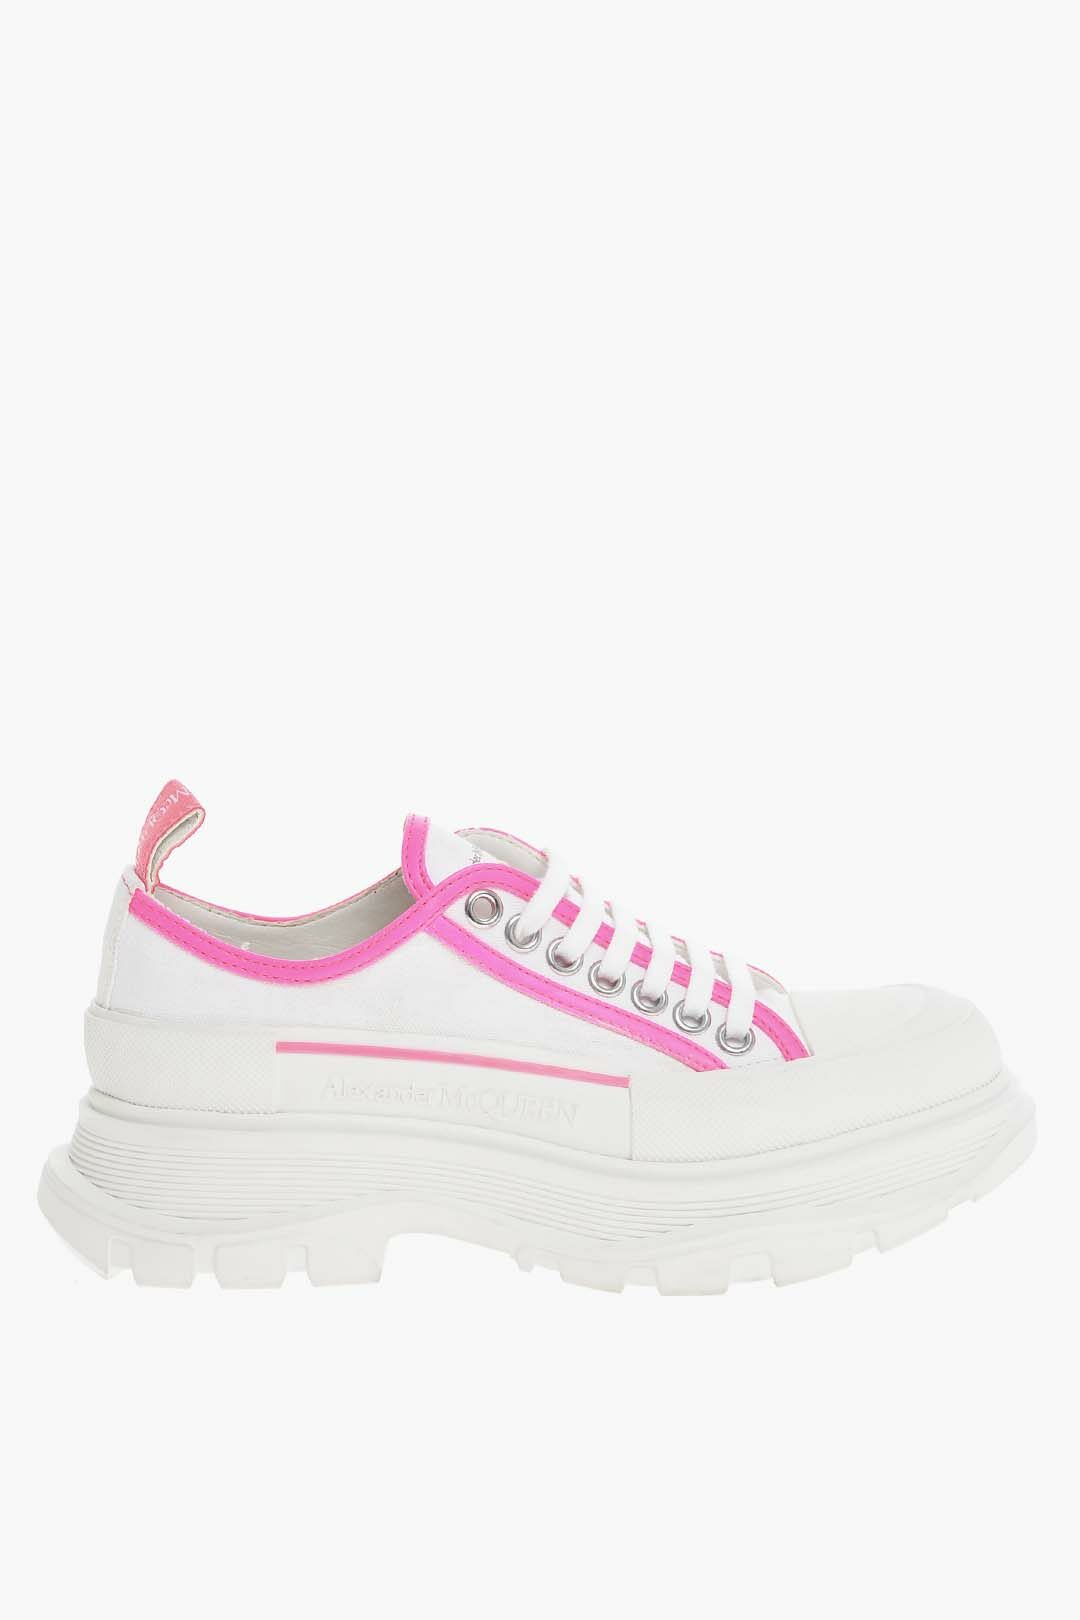 lace up canvas sneakers with neon details 1416436 zoom